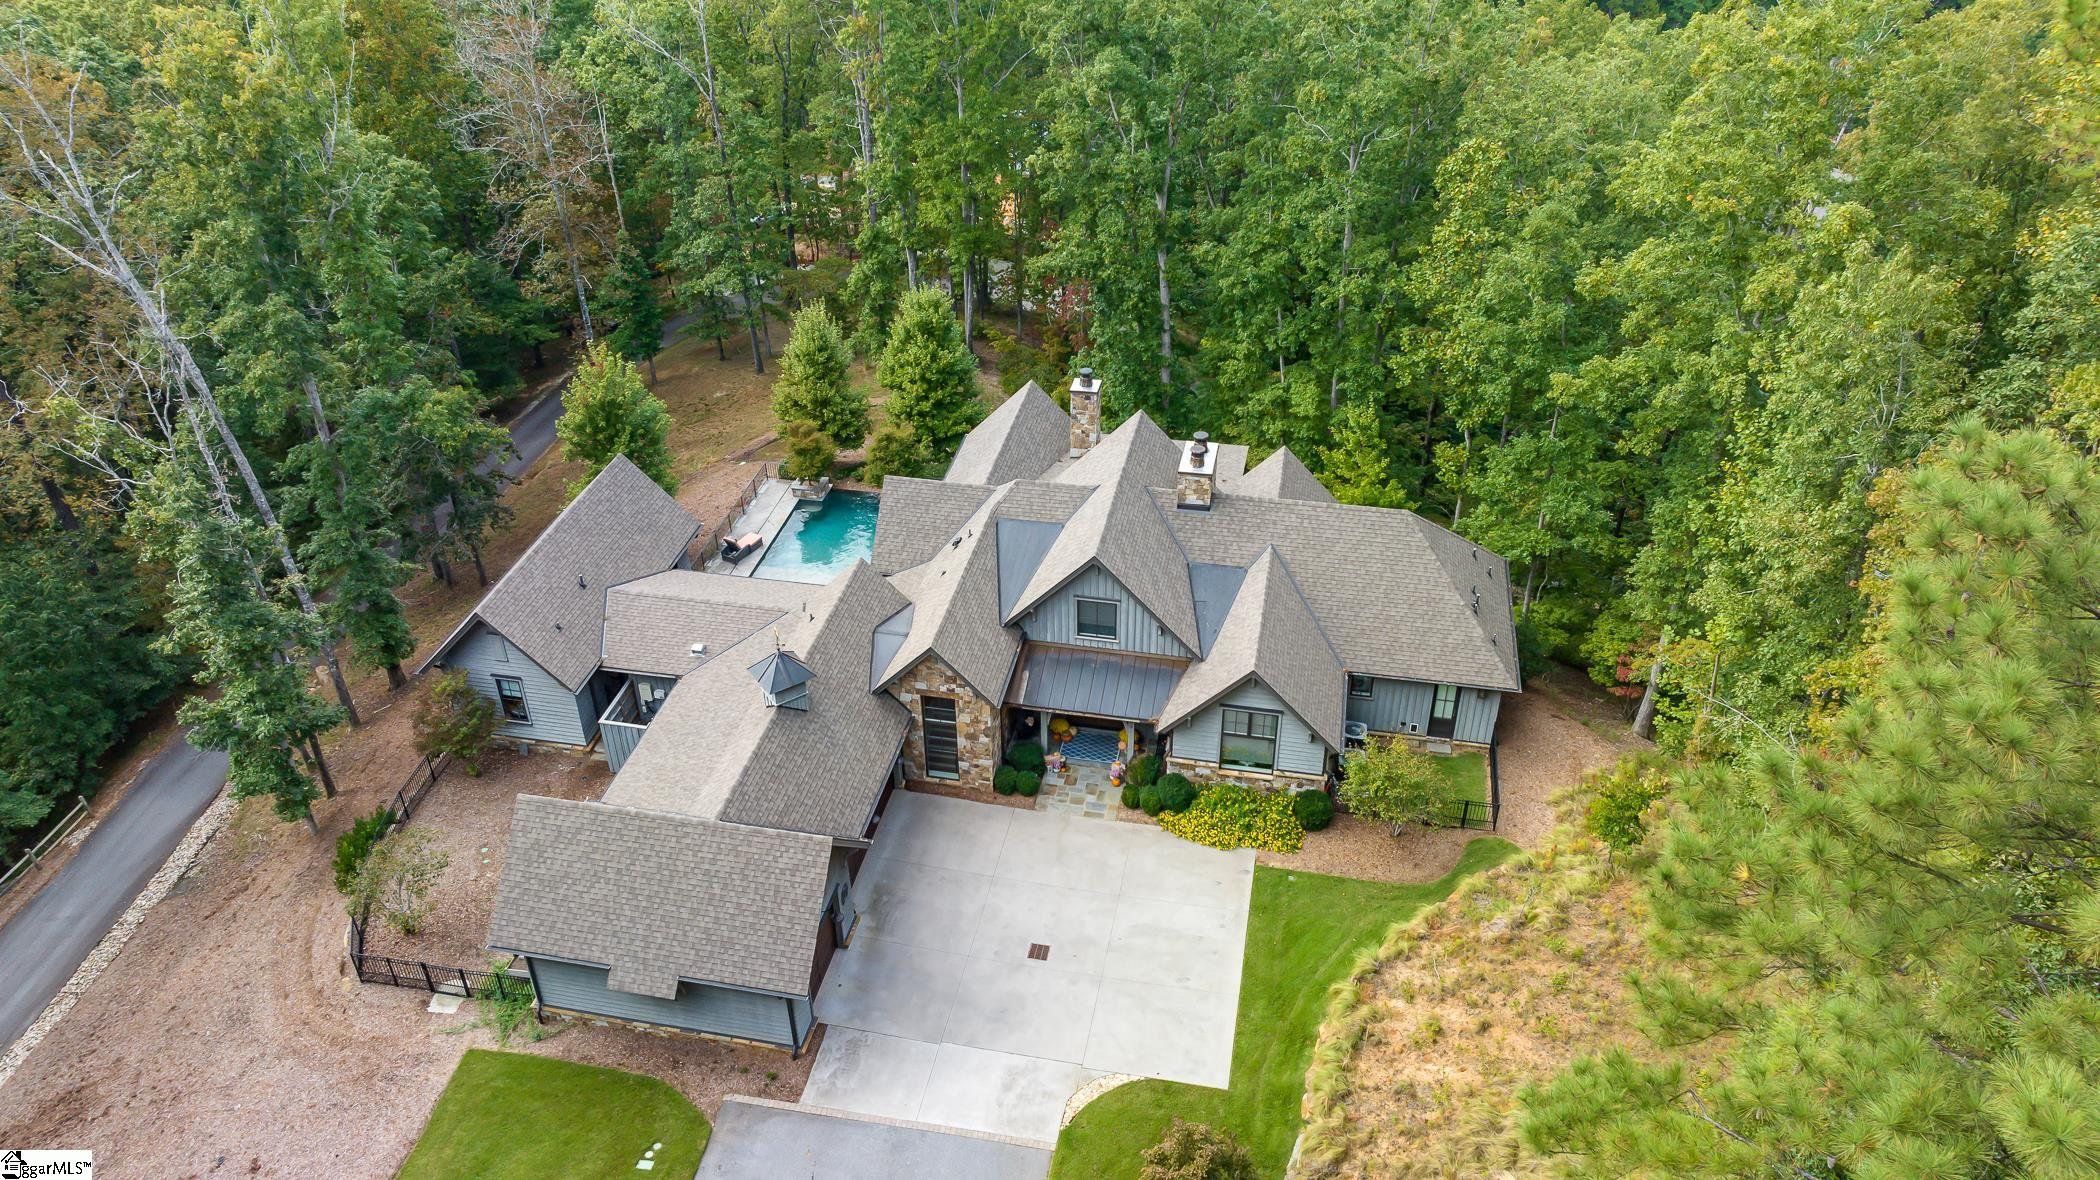 Nestled within The Cliffs at Keowee Springs, “The Sanctuary at Six Mile” was built in 2018 by Resort Custom Homes and designed by the Markalunas Architecture Group. This distinctive residence with an old-world charm sits across 3.06 acres and is surrounded by a serene, wooded setting. Offering privacy, tranquility, and seasonal views of Lake Keowee and the Blue Ridge Mountains, this retreat includes 4 bedrooms and 4.5 baths. A meandering drive along the property allows you to approach the secluded residence, complete with a 3 car garage with epoxy floors and pre-wired for an electric car. The main level is an open floor plan featuring walnut wood floors and thoughtful designer touches throughout, such as electric hardwired blinds and an integrated sound system with added modern convenience. The home is also prewired for a future generator. The Great Room, adorned with cathedral ceilings and exposed wood beams, houses a stone fireplace with gas logs and a well-positioned bar area with wine refrigerator for ease of entertaining guests. Sliding pocket wood doors open to a large screened in porch and provide all kinds of options for hosting a variety of events. The outdoor porch has retractable screens, a double-sided stone fireplace, a cozy living space that includes a porch swing, and an extra area for al fresco dining for all seasons. The kitchen, meticulously designed for culinary endeavors, features coffered ceilings, a walk-in pantry, dining space which also opens to the screened in porch and has views of the pool area. Highlighted by a large island with seating for six, also includes a built-in microwave and warming drawer. There are high-end appliances throughout, a built-in Miele coffee maker, a Wolf gas-top range, a wall oven that has steam and convection capabilities and sits with a Bluestar double French door oven. Offering plenty of cooking options and family entertaining space. The laundry room is close by and allows for easy access after pool time and main floor activities. The guest house features a one-bedroom, one-bath suite. The guest house bath suite is equipped with heated floors, a garden tub, and a separate walk-in shower creating an ideal haven for visiting family or friends. The covered patio by the pool area provides a delightful space for outdoor gatherings and grilling, offering a picturesque view of the infinity pool, hot tub and soothing sounds of a waterfall. There is a fenced area off the covered patio that could be used for raised planters and gardening space. The owner's suite is on the opposite side of the house and on the main floor. It includes a sitting area, stone fireplace and a generous bath area with garden tub, doorless walk-in shower, and heated floors. The owner’s closet features an island dresser, a dressing table area, a stackable laundry space with washer and dryer, and exterior access with a doggie door leading to a secondary fenced area. The study showcases a custom-built desk and bookcases. The lower level, reachable by an elevator or stairs, hosts 2 bedrooms and 2 baths, along with a central living room area that includes 4 built-in bunk beds for children and an outdoor covered patio. There is an extra room that can be designated for exercise equipment, a workshop or additional storage area. This property offers convenient access to the new Springs clubhouse, the Bistro, the Beach Club, Lake Club, plus a variety of amenities, including golf, pickleball, boating, hiking trails and much more. A Cliffs Membership option is available which will allow you and your family to enjoy all activities across 7 different Cliff communities.